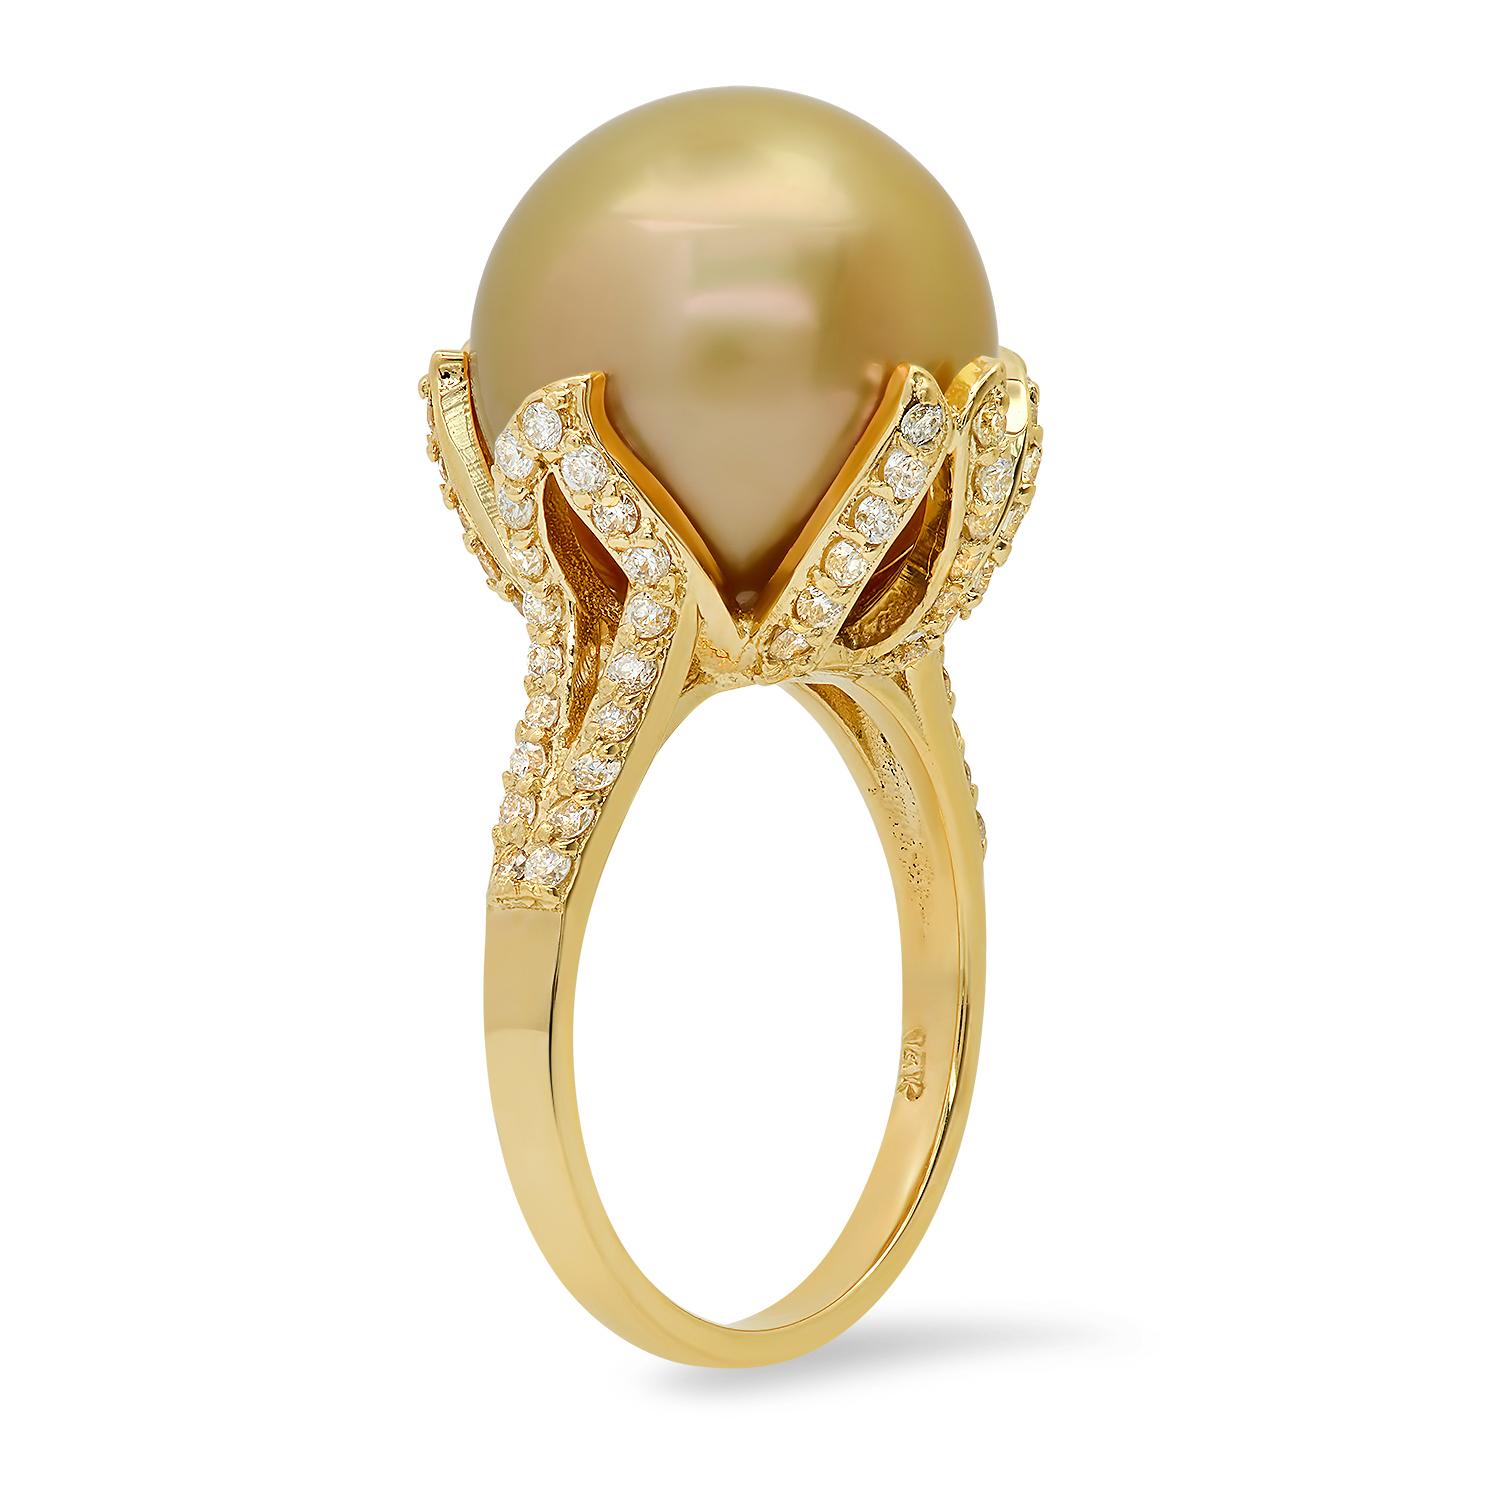 14K Yellow Gold Setting with 14mm South Sea Pearl and 0.93ct Diamond Ring